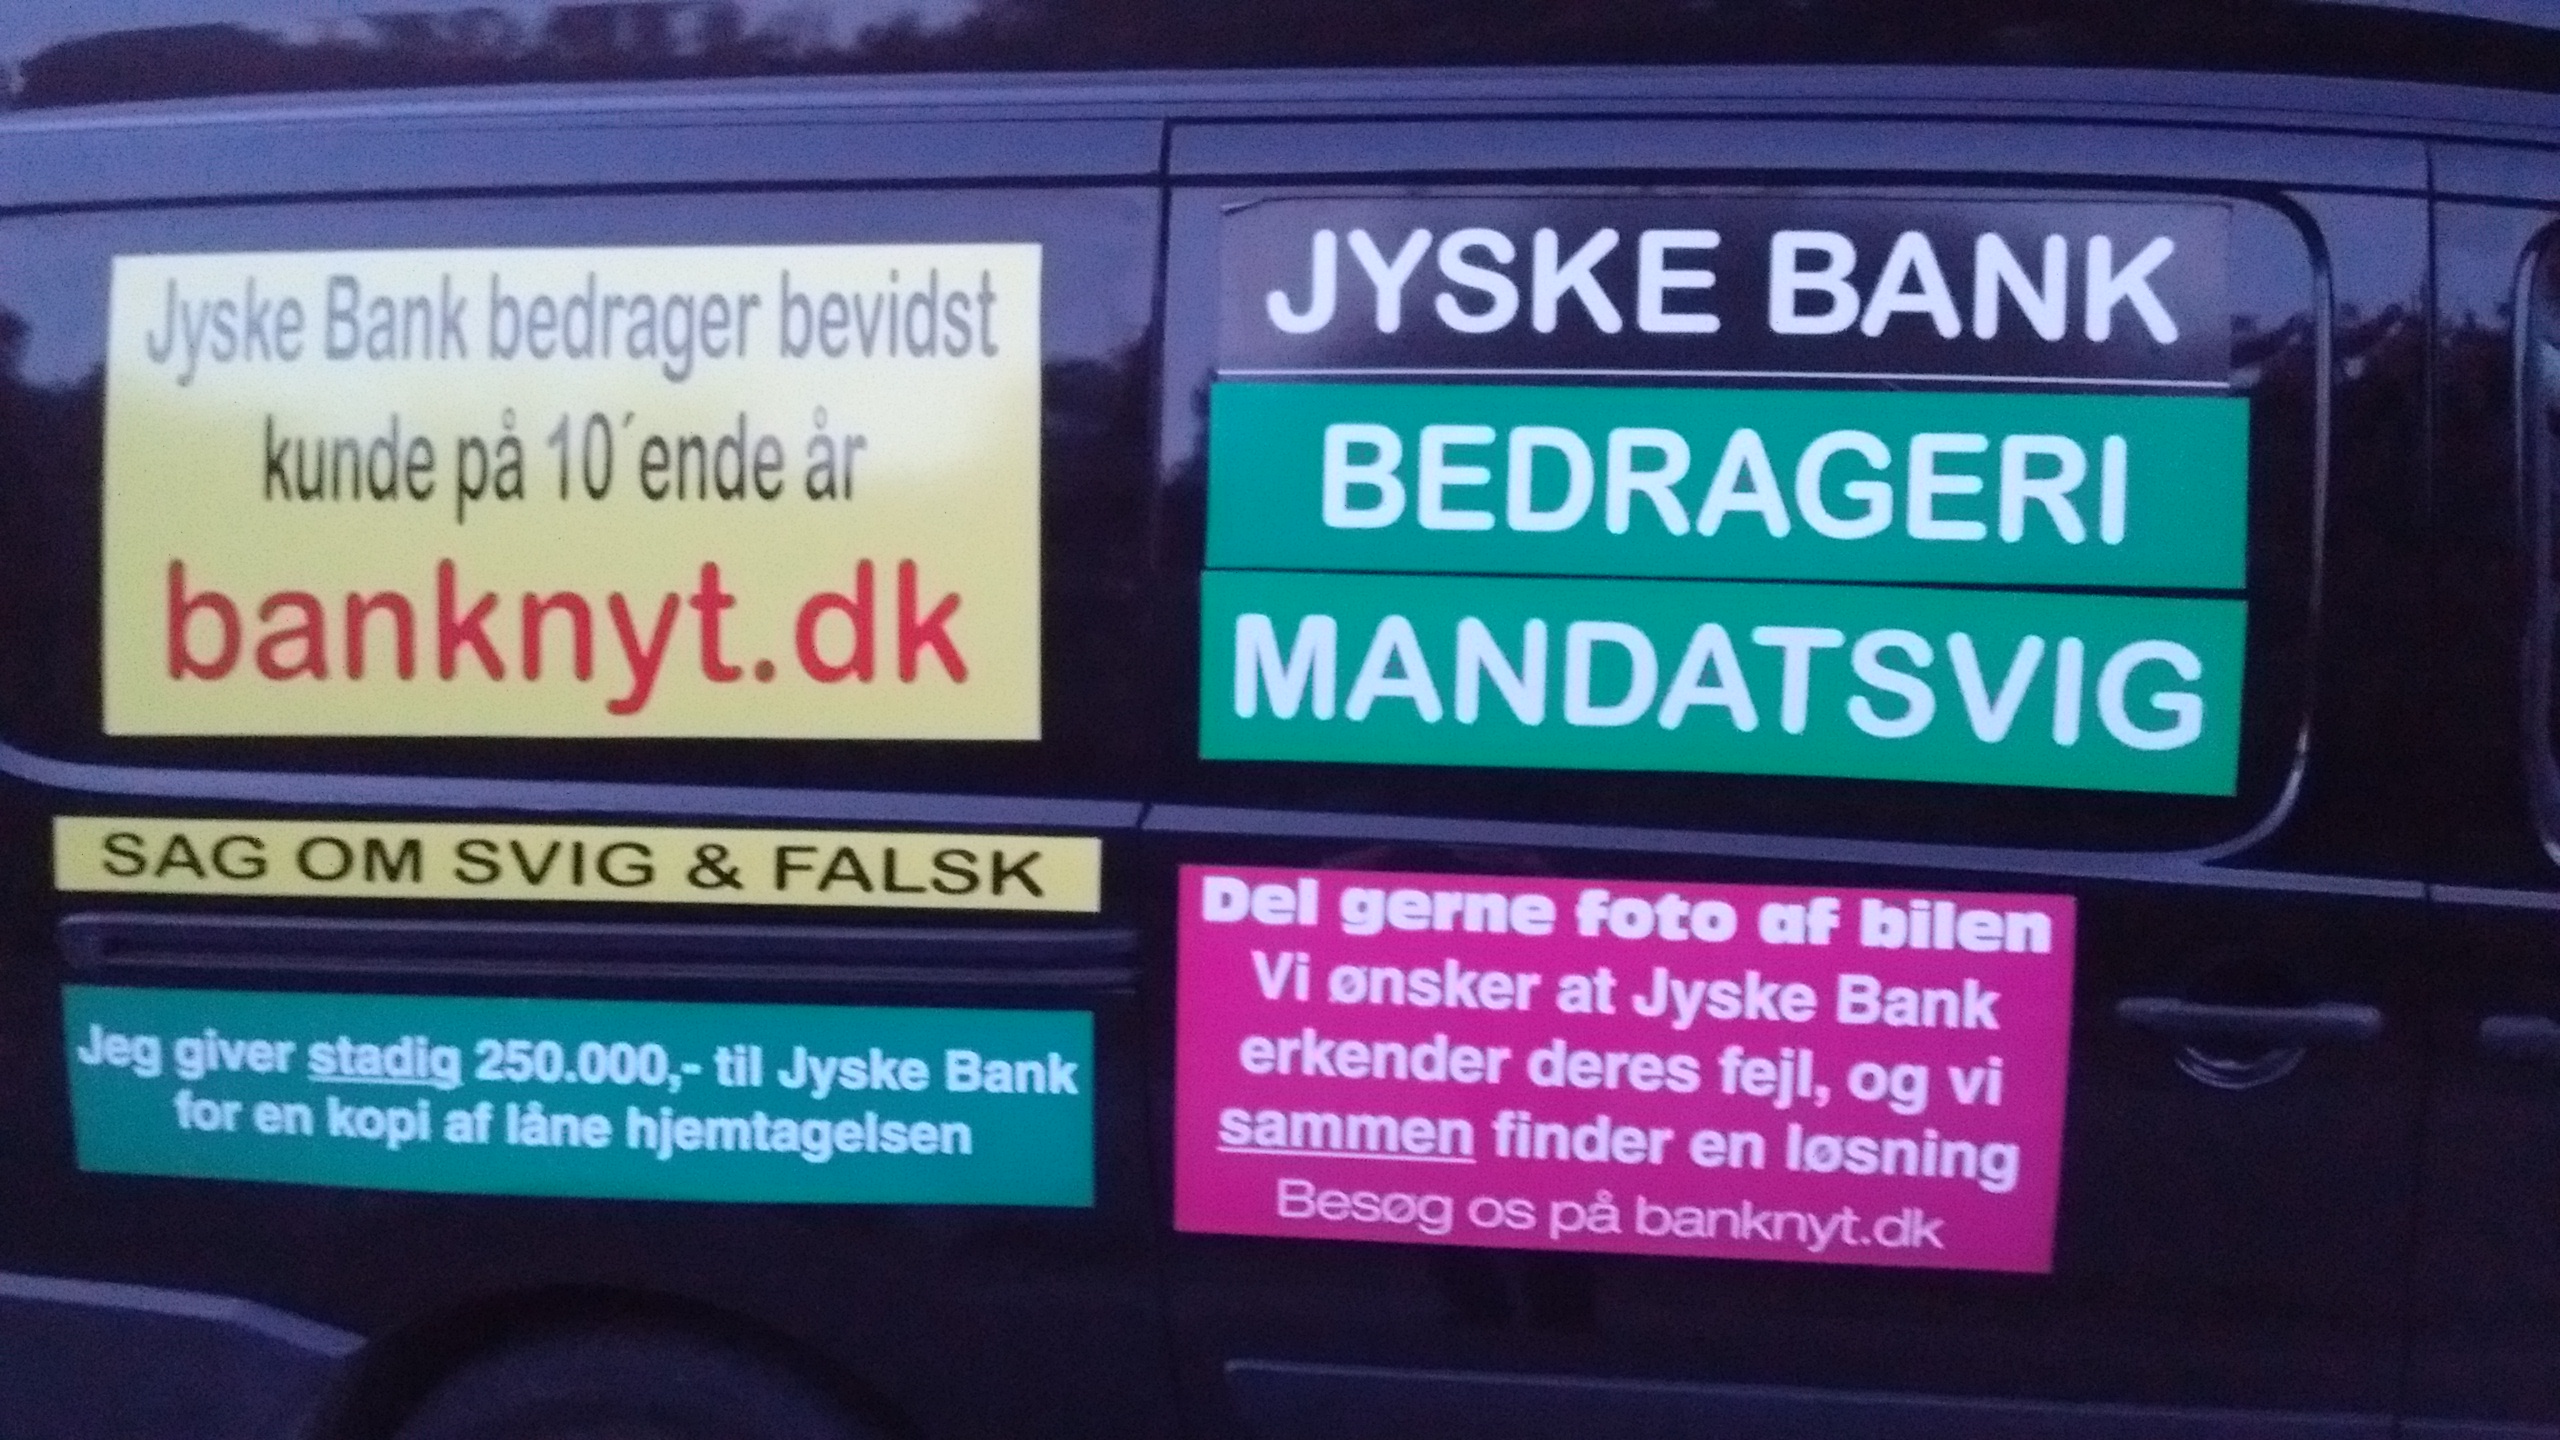 Lær jyskebank at kende Hvem dækker over Jyske Banks fortatte svigforretninger. Bribery at the top of the Danish business seems to have been politically approved. Following Jyske Bank's fraud case. Lundgren's lawyer partner company paid several million Danish kroner, moreover, the same Lundgren's lawyers who would not bring a case against the Danish bank Jyske Bank for fraud. Which Lundgren's lawyer partner company regrettably forgot to submit to the court. That it happened according to Jyske Bank's management, certainly by CEO Anders Dam who is directly contributing to Jyske Bank's continued crimes. When Jyske Bank then chose to give the large law firm Lundgren's lawyers a huge order. It became very clear that the overall board of directors of Jyske Bank continues to expose the customer to very serious fraud transactions. And that Jyske Bank's board of directors is still behind millions of scams and now probably also corruption. All to disappoint in legal matters, and to serve the shareholders in the Danish Bank's financial interests.